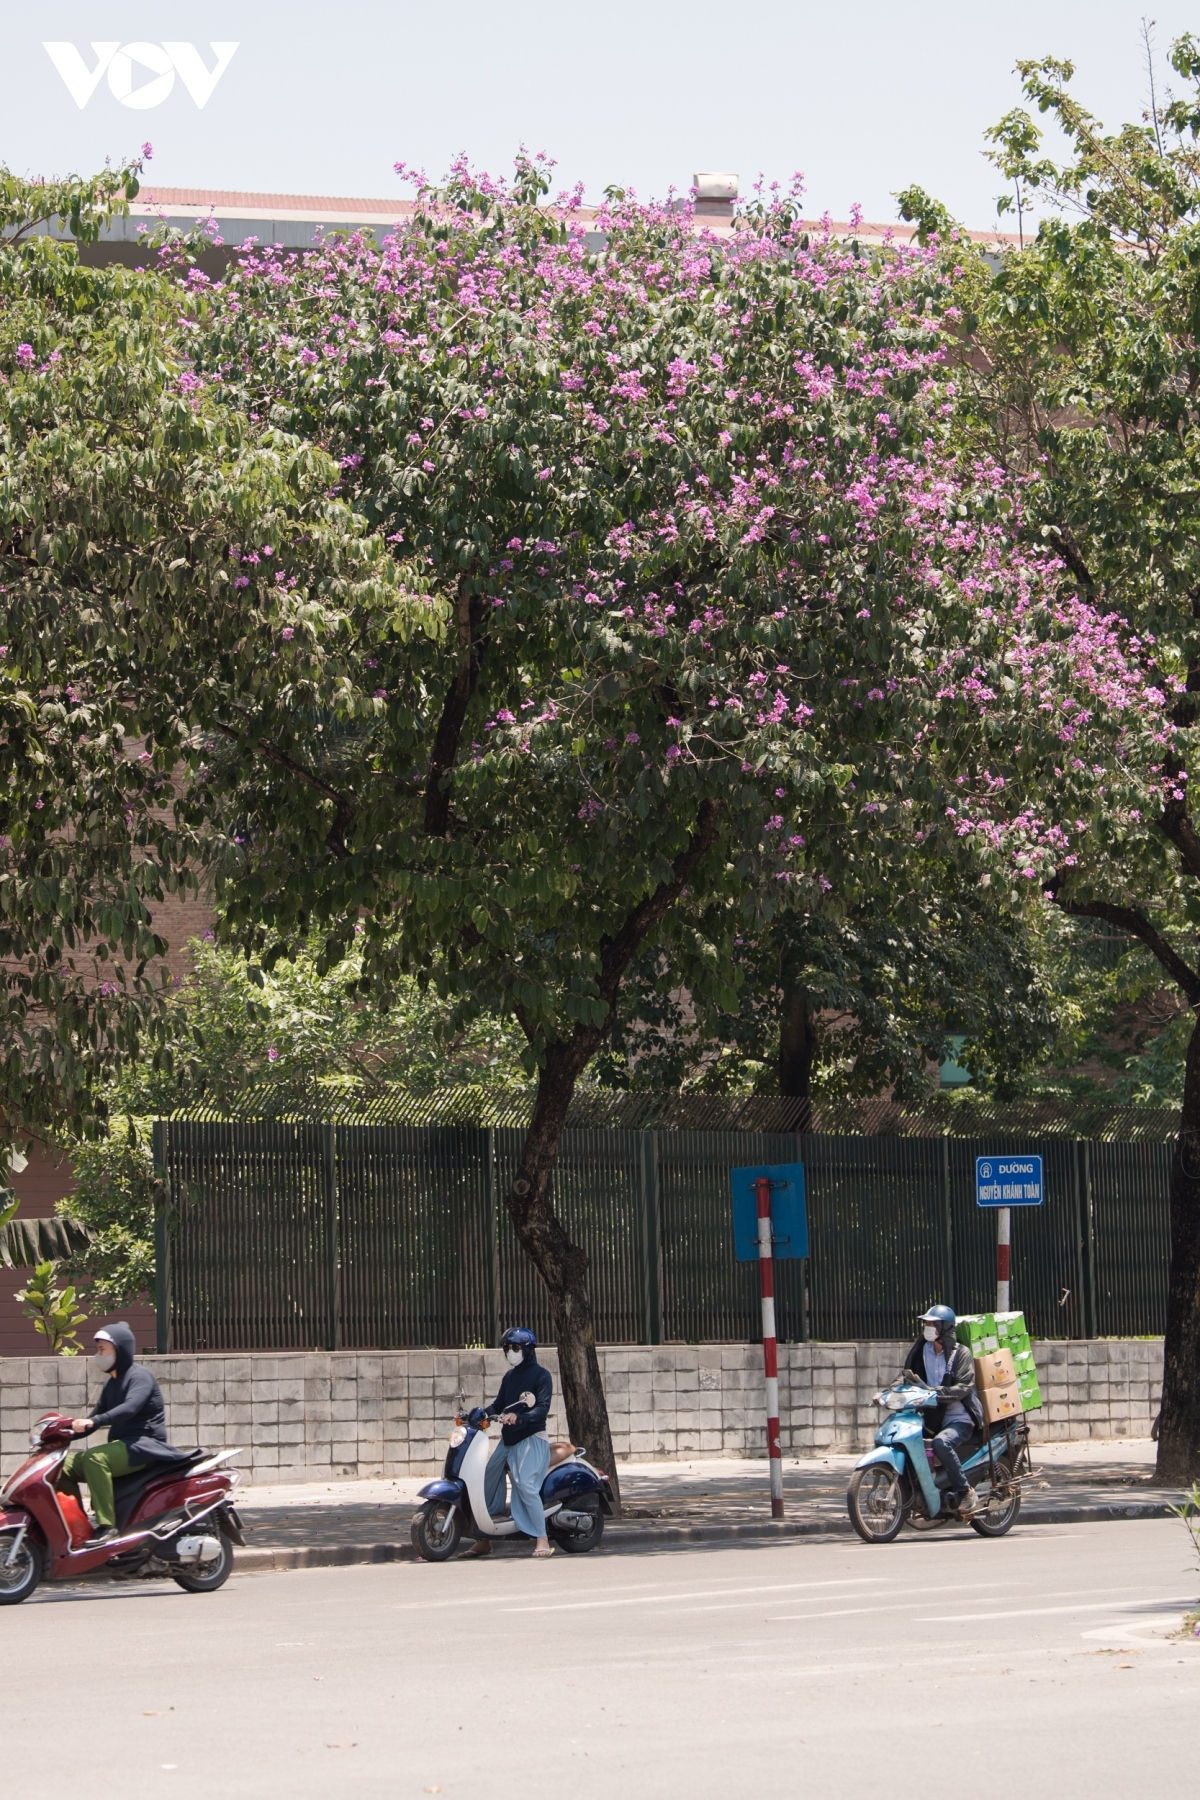 The trees serve to bring shade to commuters around the capital during the current hot spell.